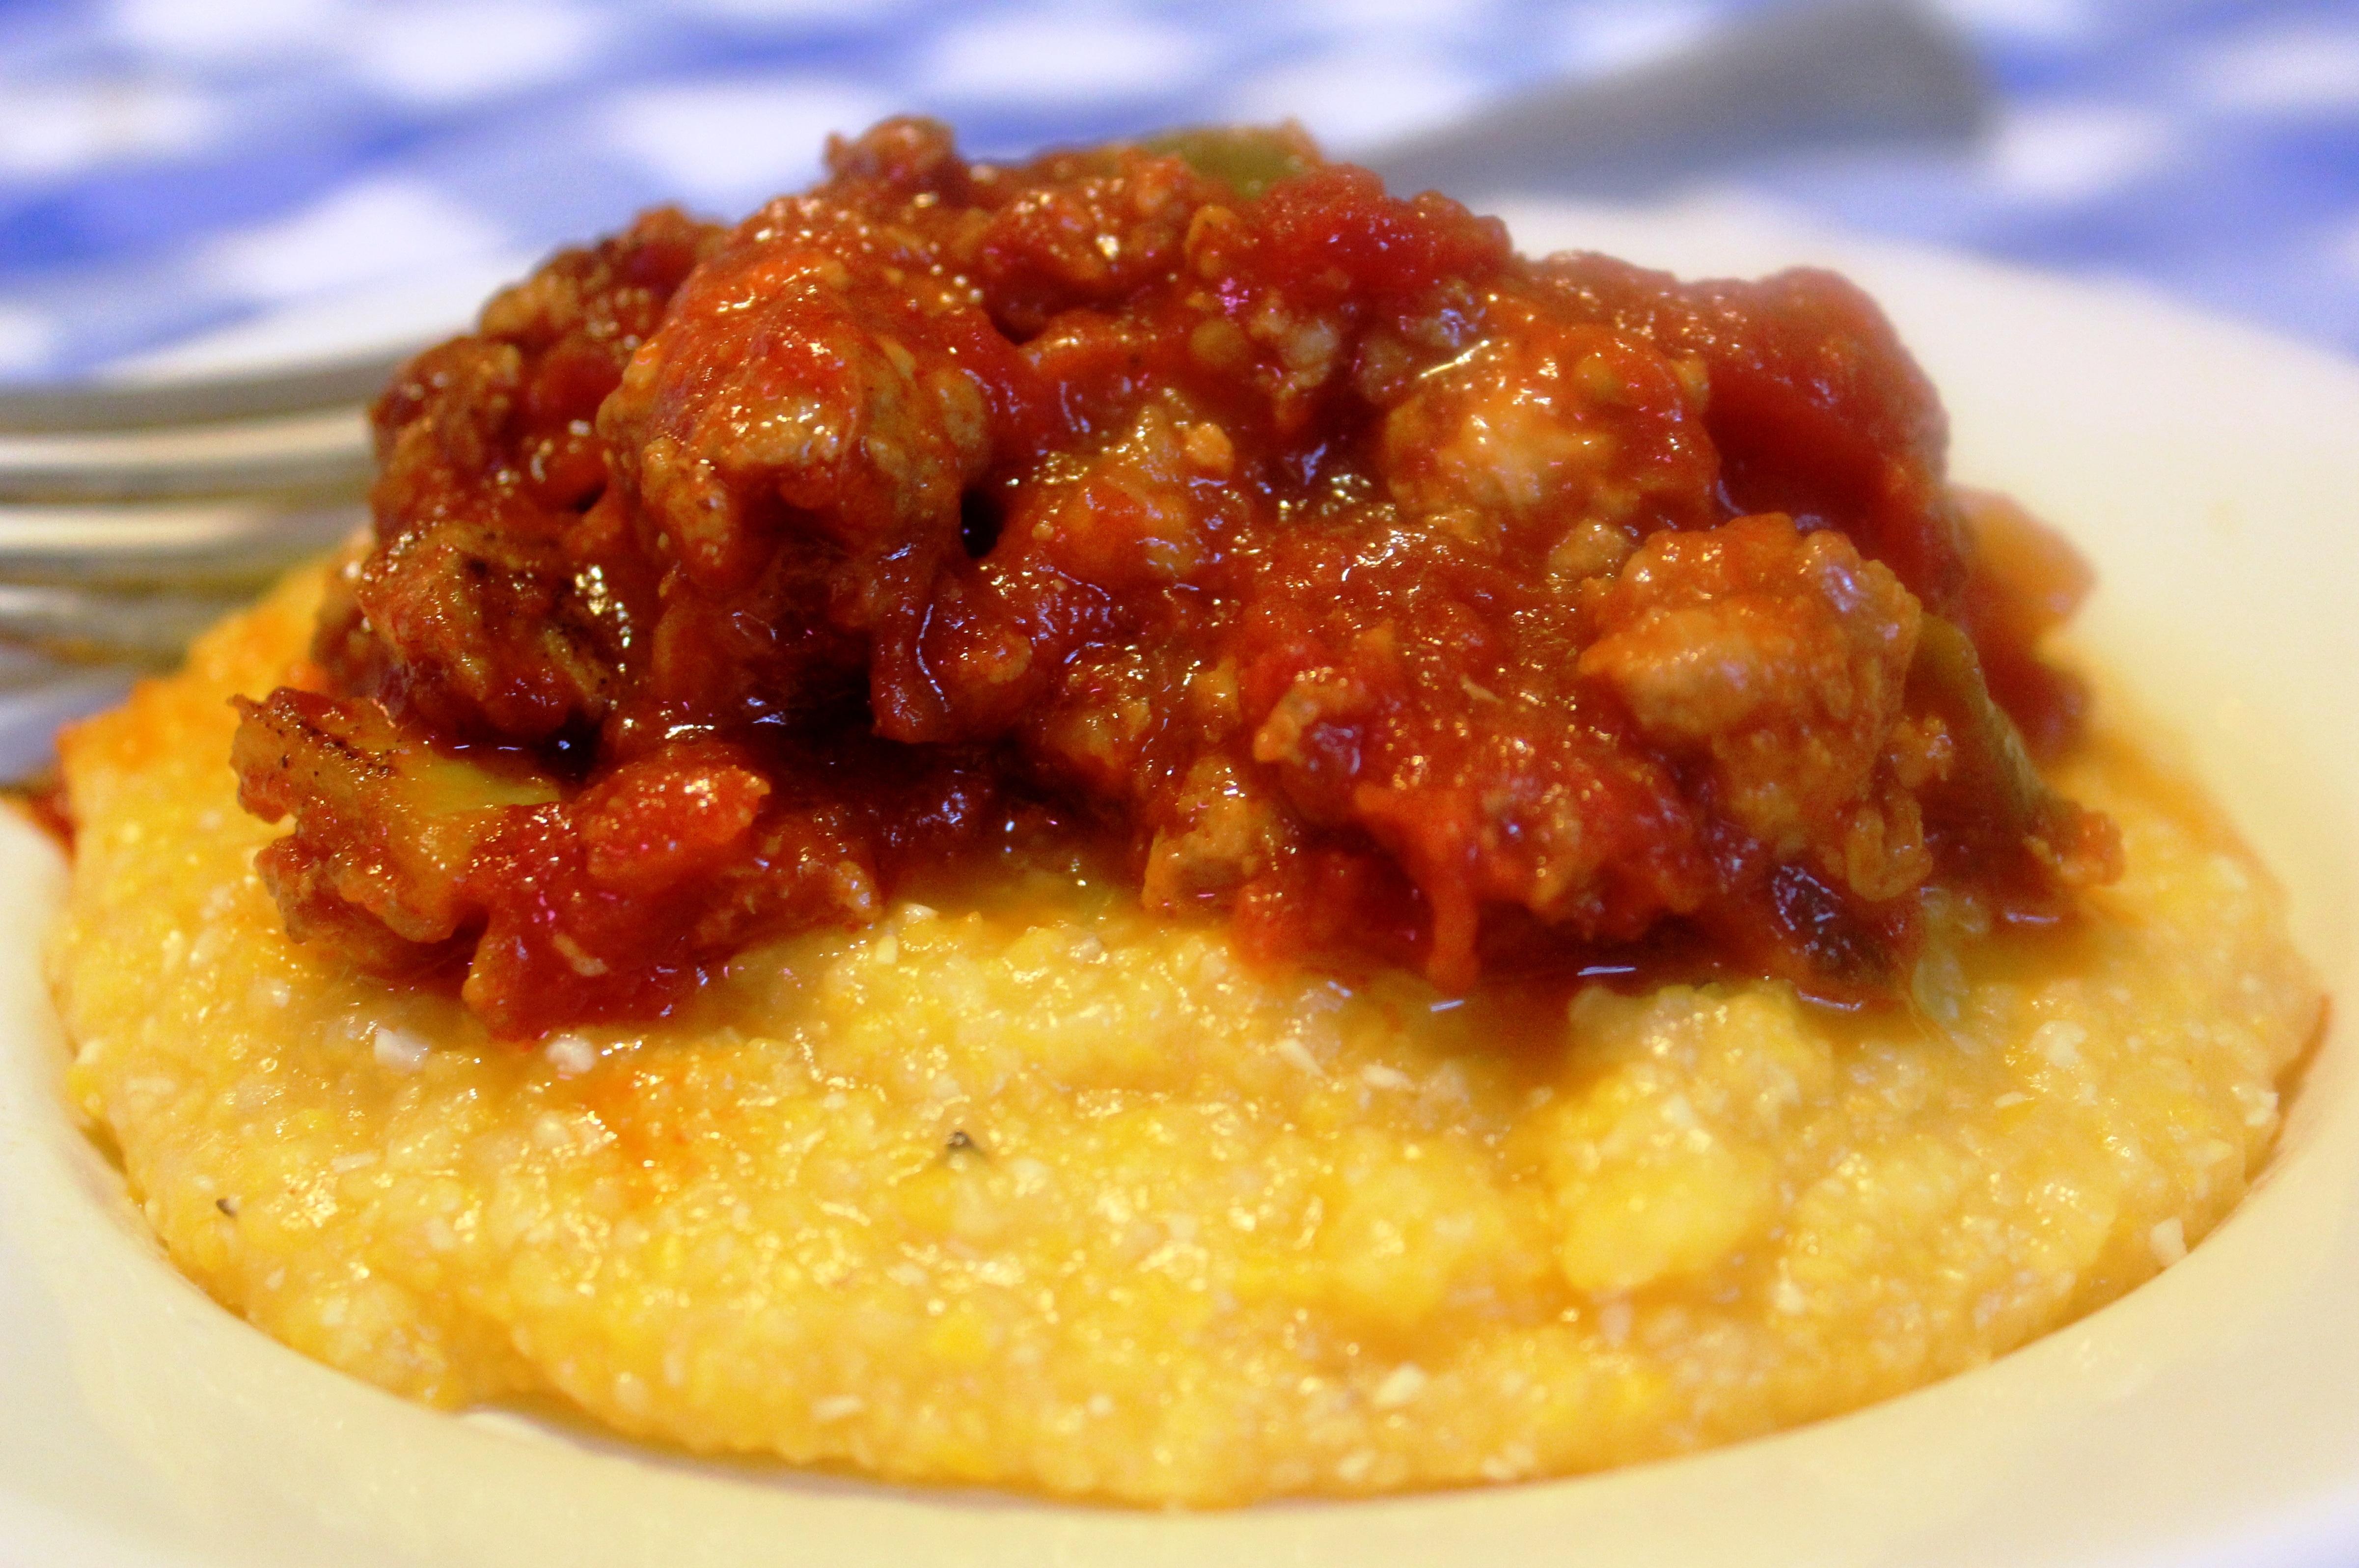 grits and red sauce